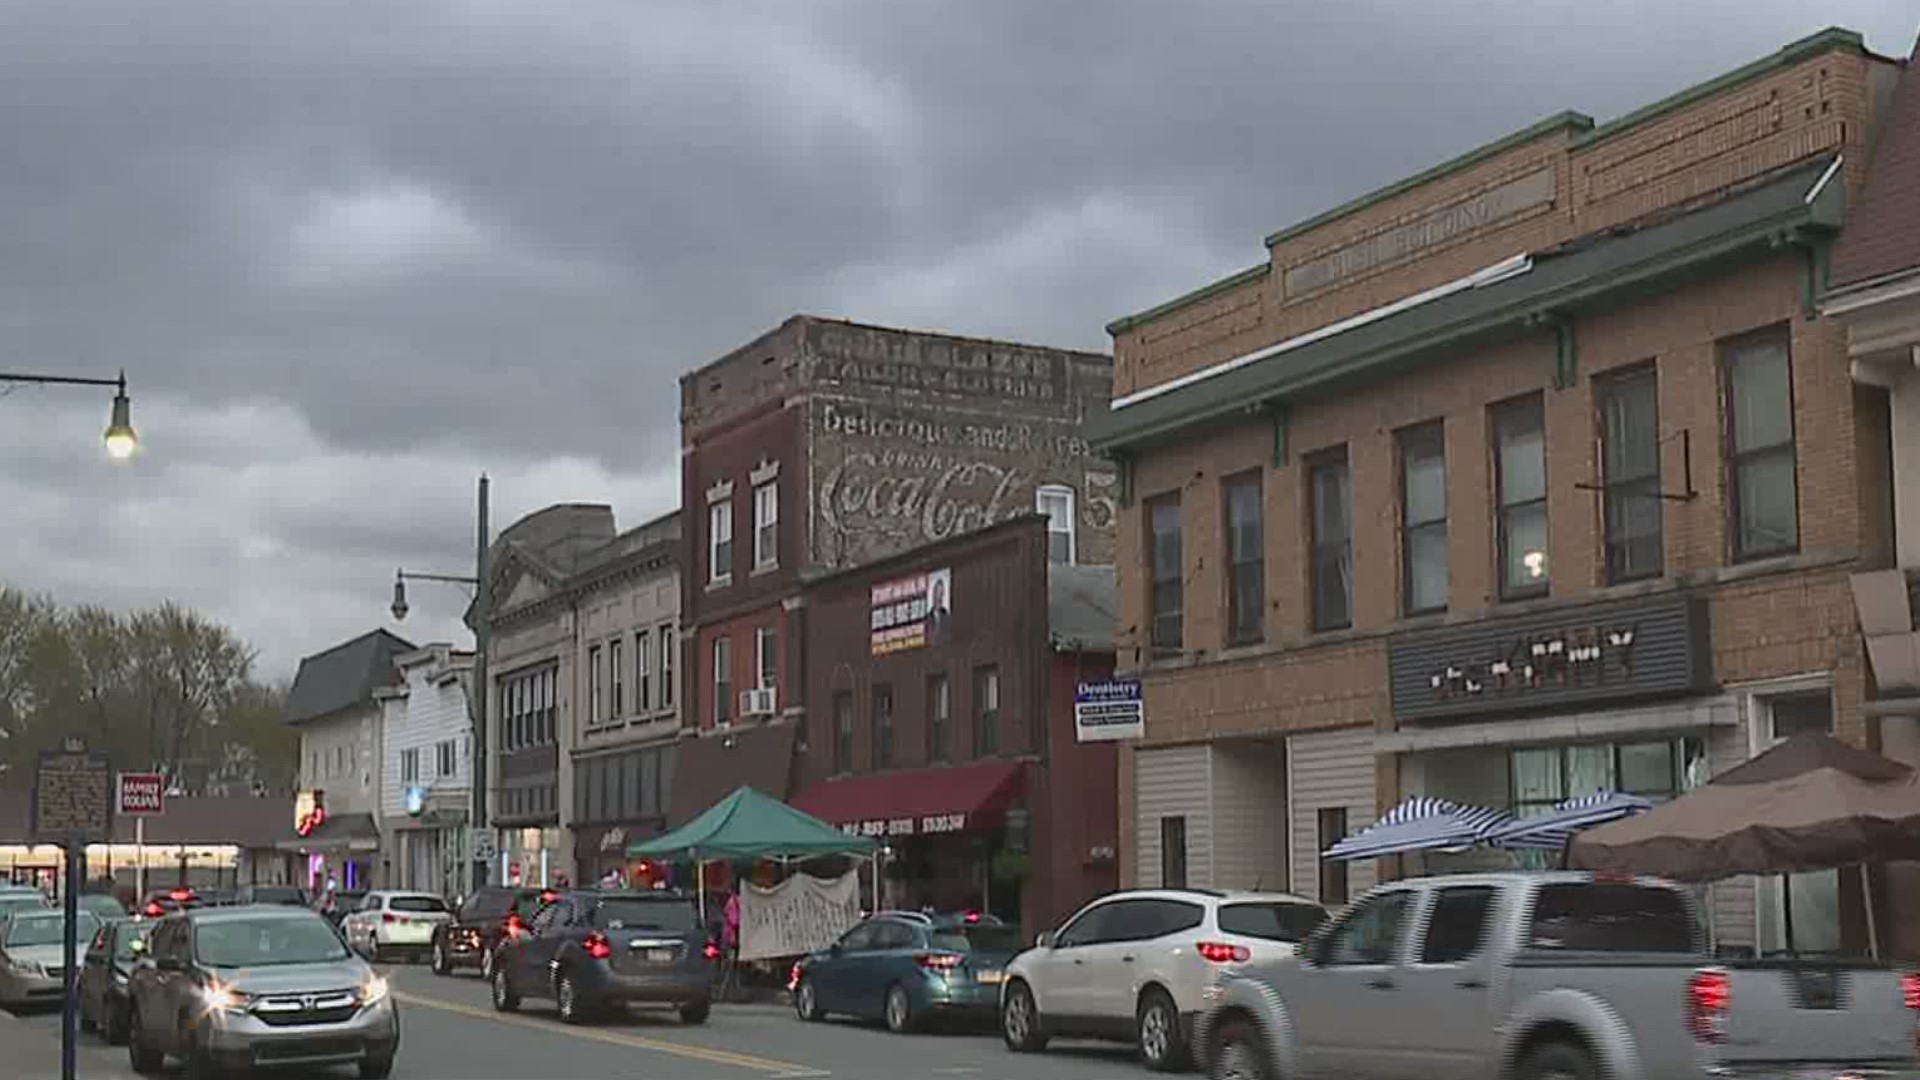 After a year of struggles from the pandemic, some businesses in Lackawanna County joined forces to help draw in more customers.